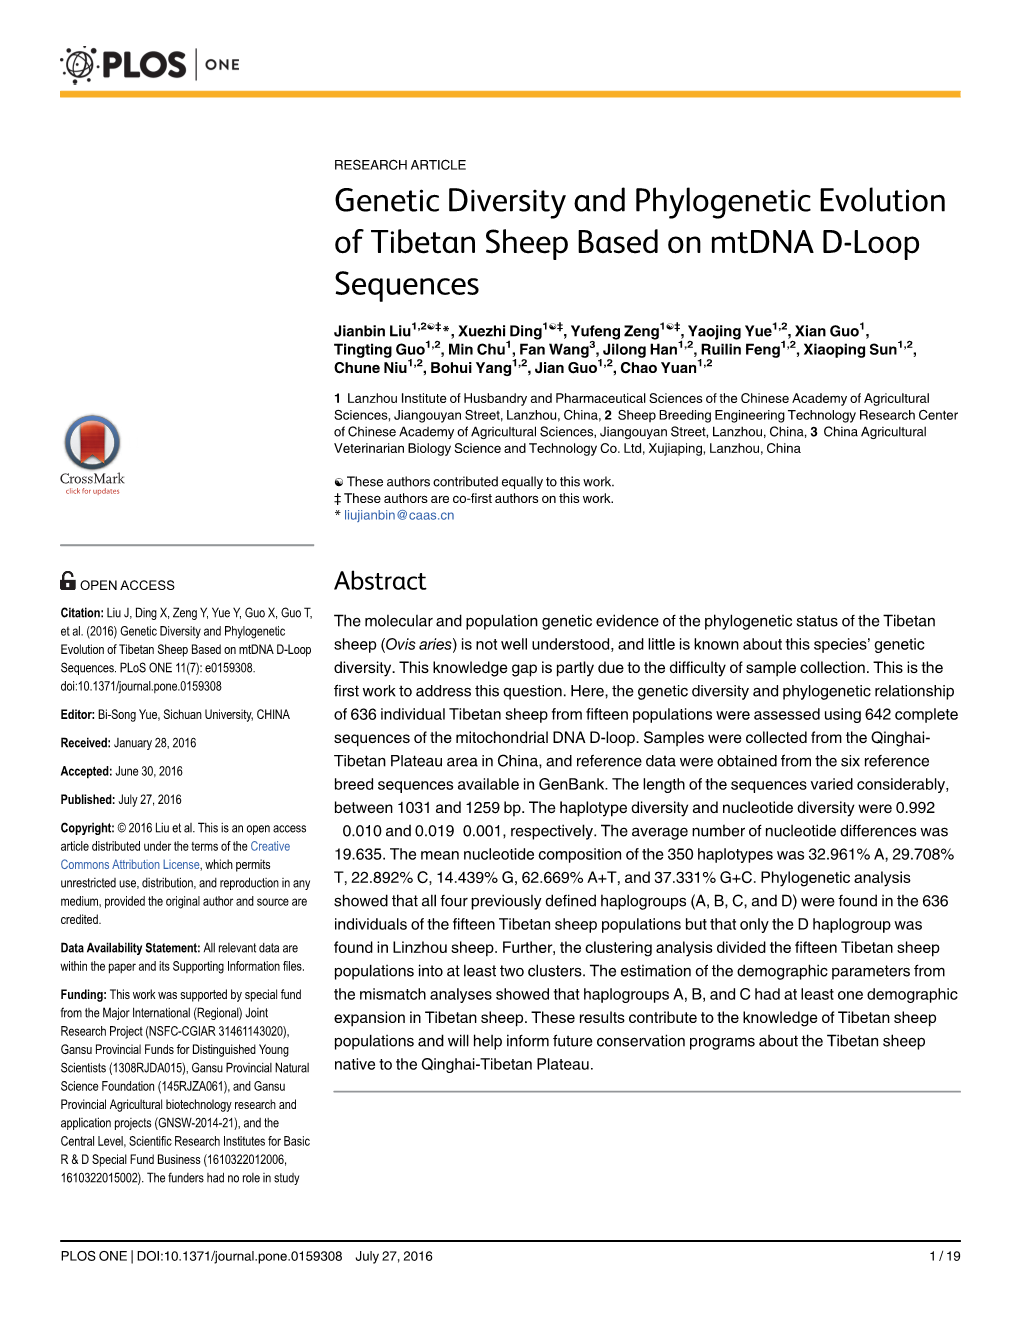 Genetic Diversity and Phylogenetic Evolution of Tibetan Sheep Based on Mtdna D-Loop Sequences